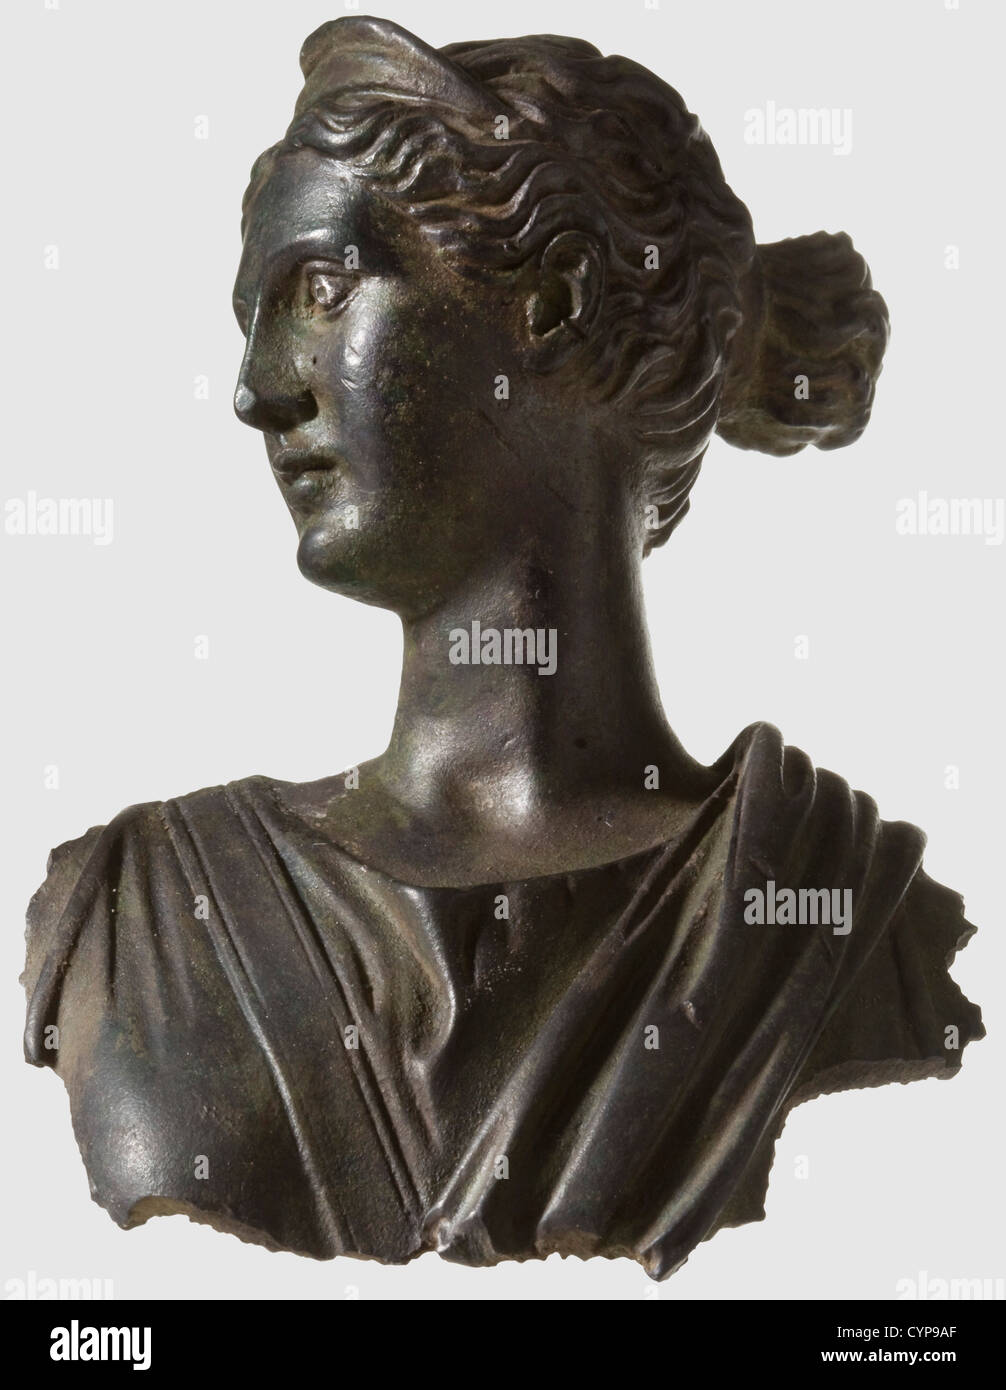 A Roman female bust,1st/2nd century A.D. Bronze with fine,dark green patina. Fragment of a statue with jagged edges on the back,shoulders,and chest. Finely modelled head with silver inlaid eyes. Hair tied into a bun and with small tiara. Chiton and cloak in well defined folds. Cleaned archaeological find,mounted on an acrylic glass base. Height without base 9.5 cm,historic,historical,ancient world,ancient world,ancient times,object,objects,stills,clipping,cut out,cut-out,cut-outs,sculpture,sculptures,statuette,figurine,figurines,statuette,Additional-Rights-Clearences-Not Available Stock Photo